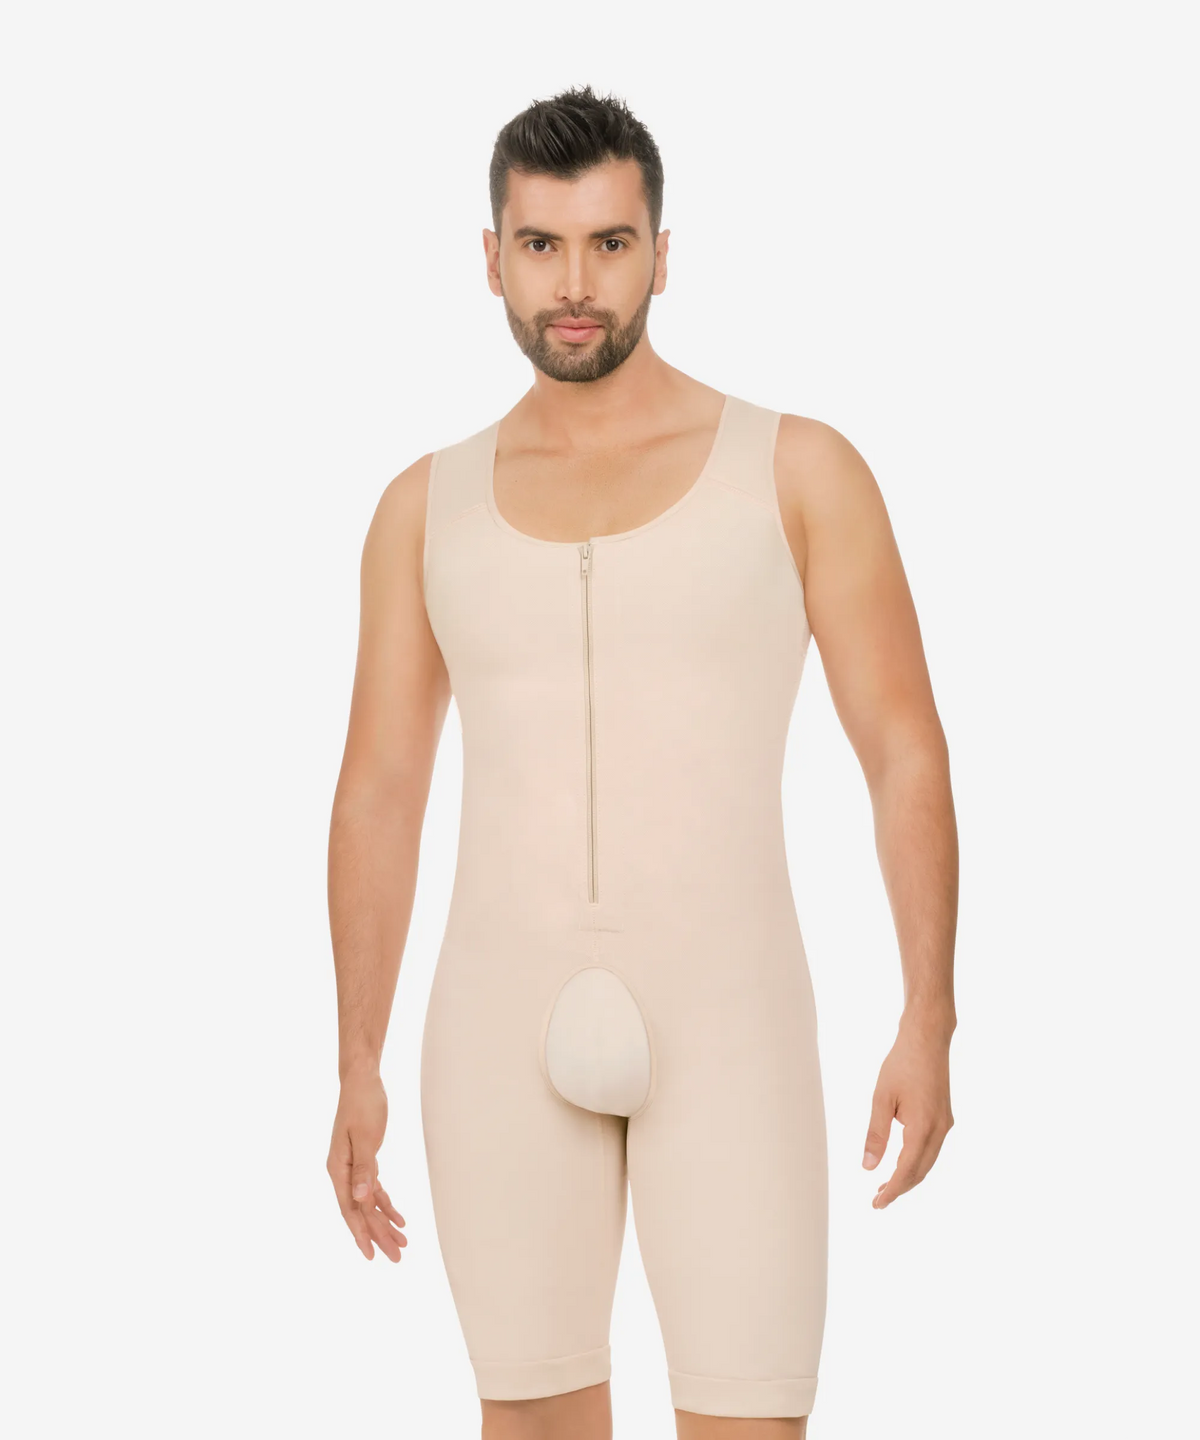 Men Body Shaper China Trade,Buy China Direct From Men Body Shaper Factories  at